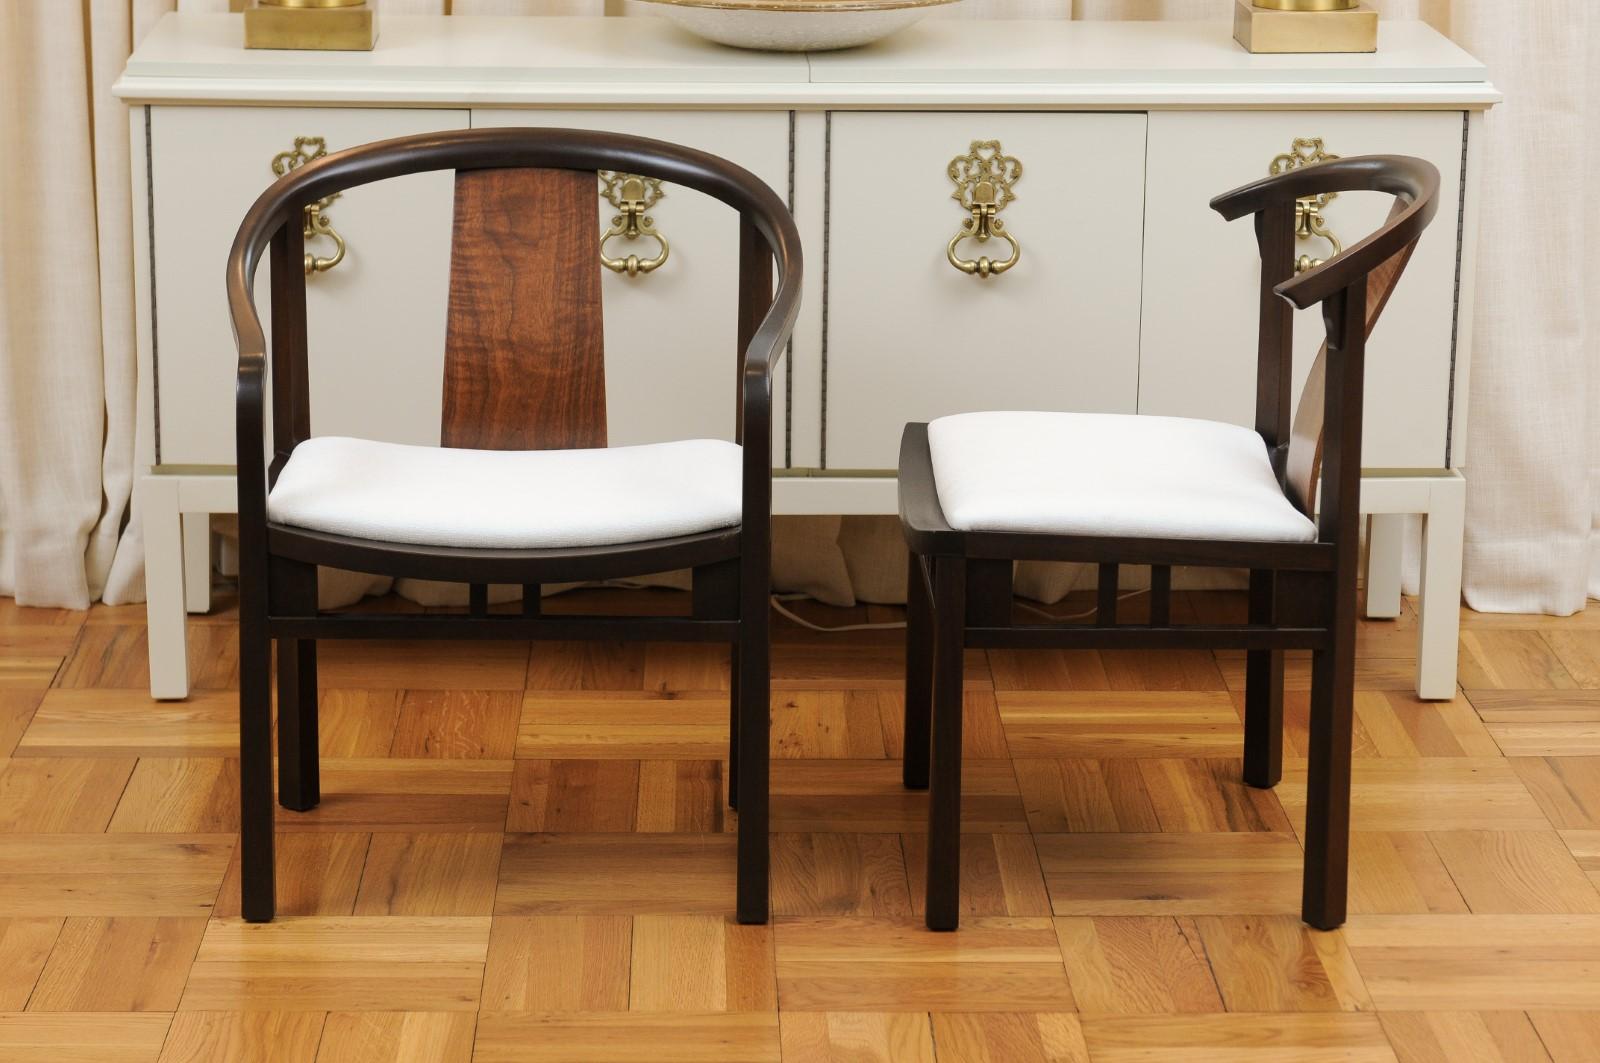 Incredible Set of 14 Rare Walnut Dining Chairs by Michael Taylor, circa 1955 For Sale 4